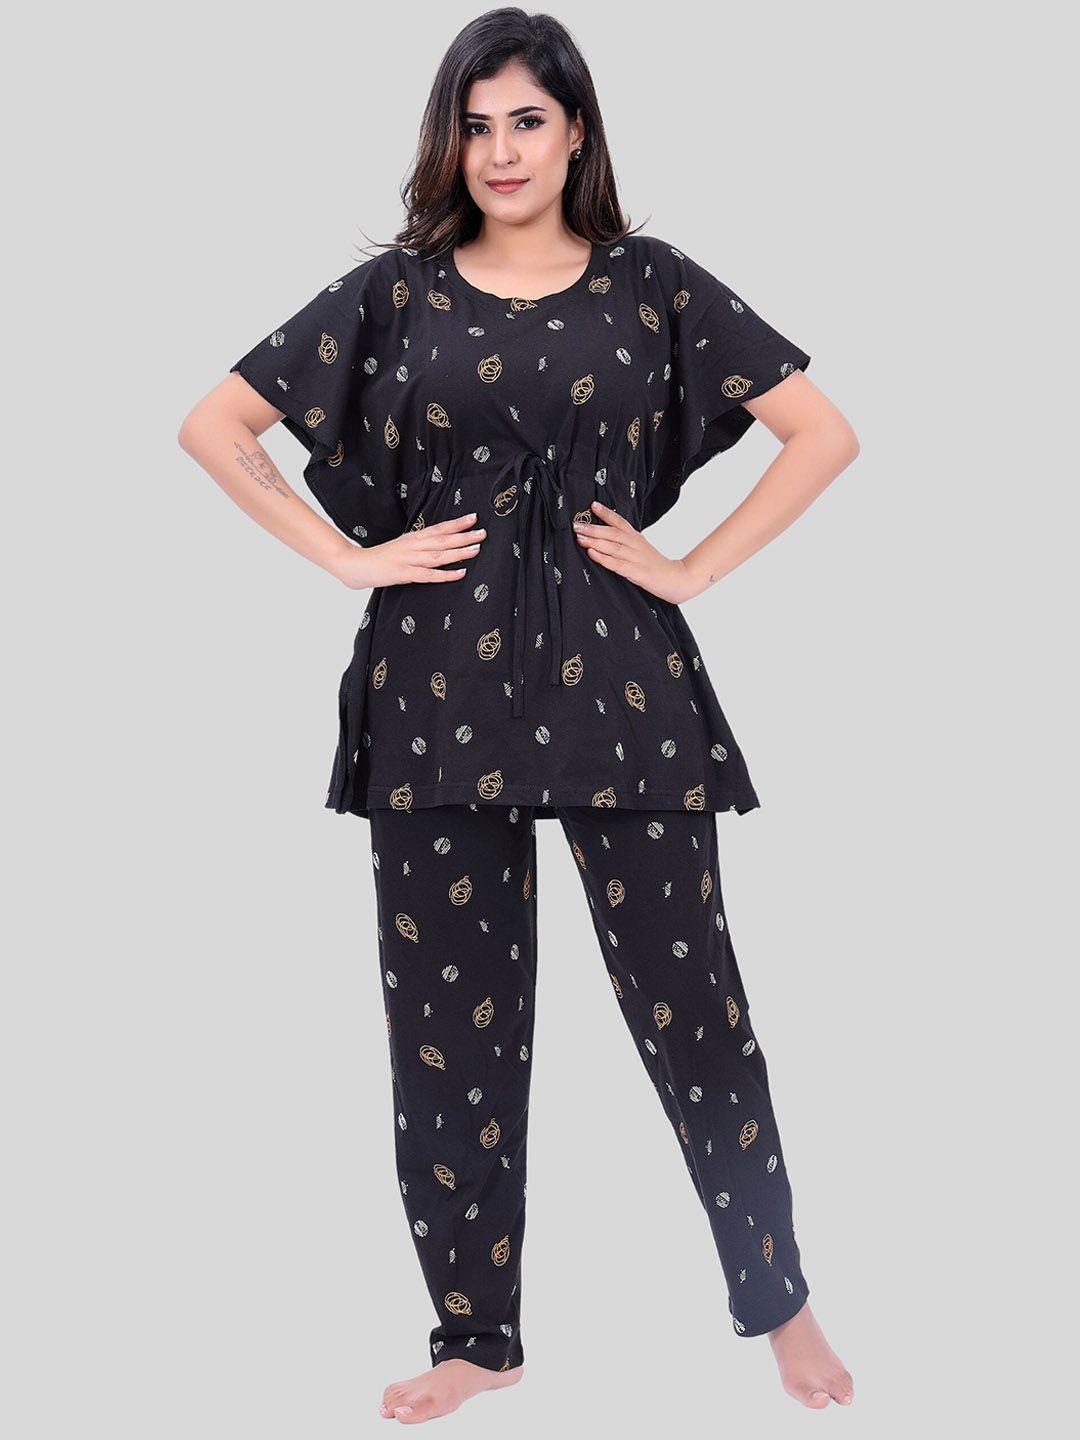 fabme-printed-pure-cotton-night-suit